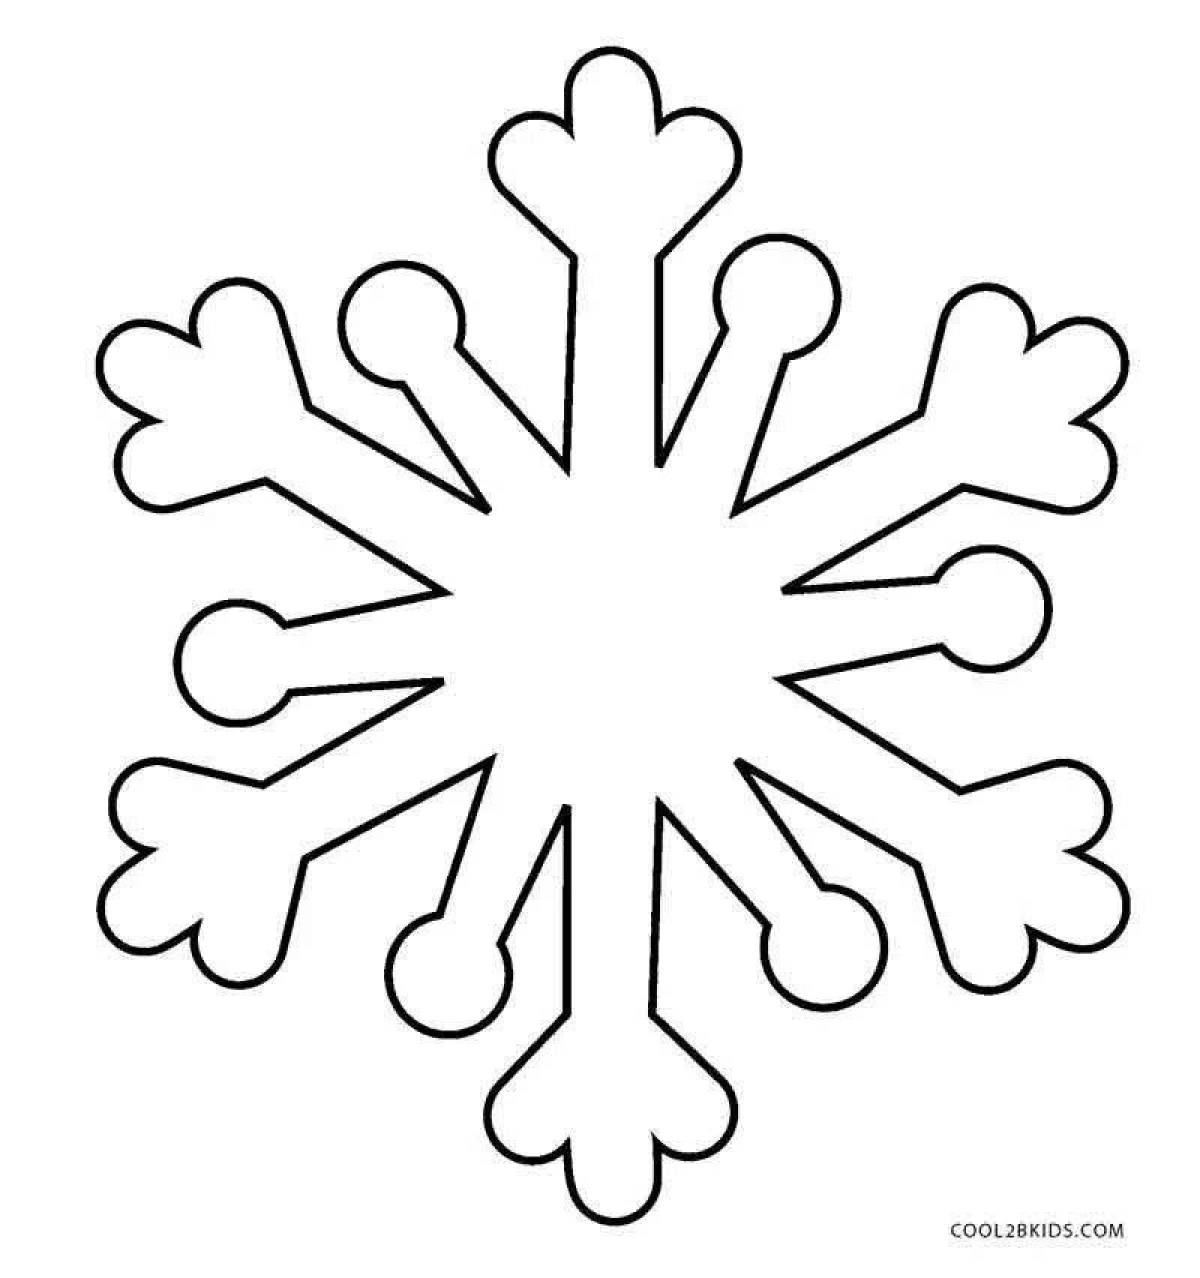 Live coloring snowflake for children 3-4 years old